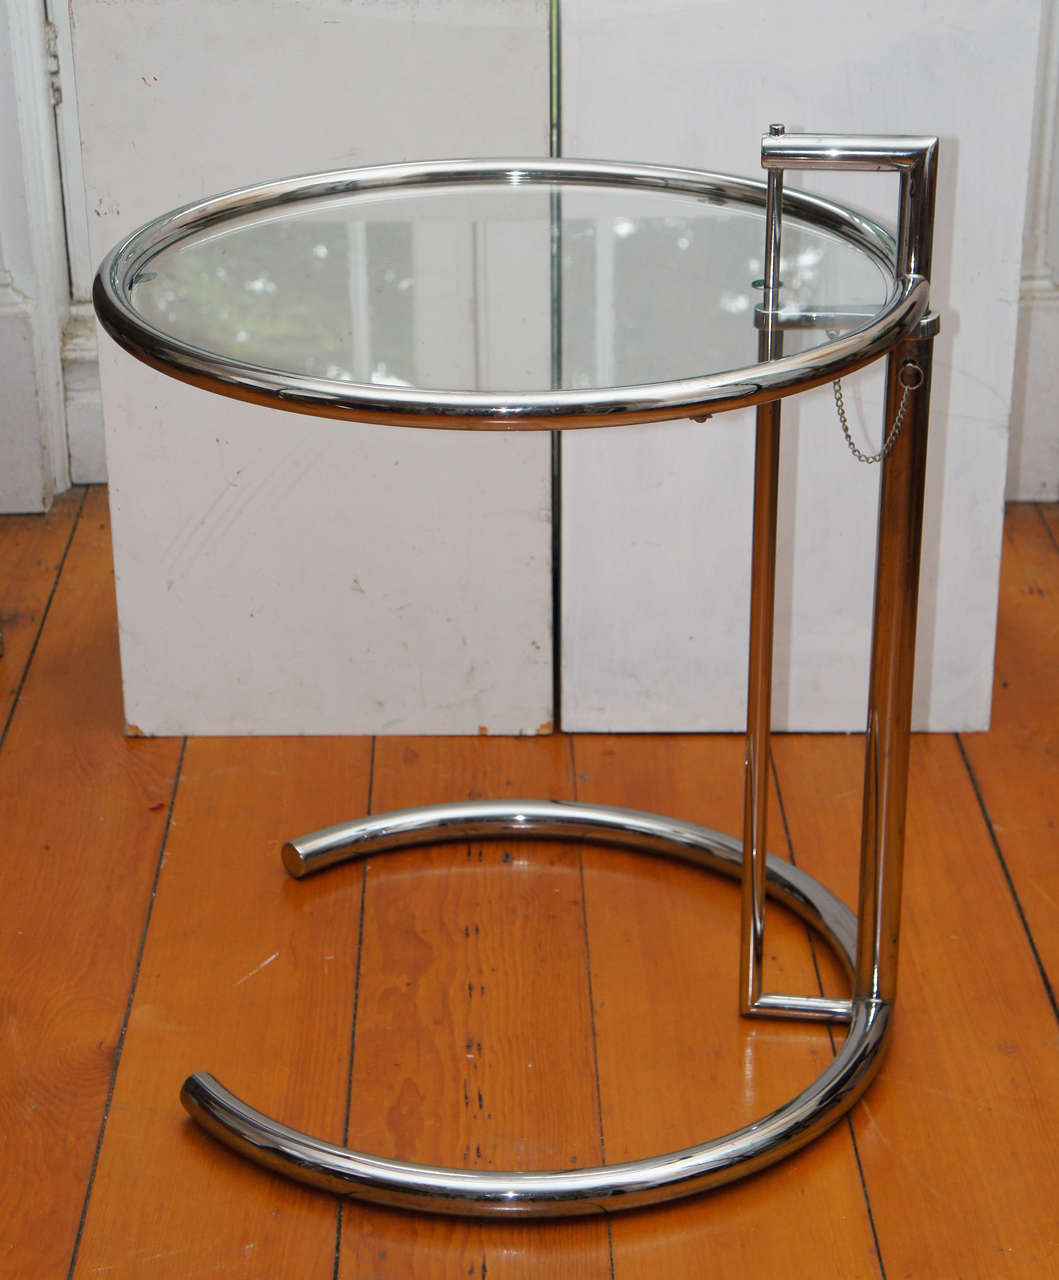 Eileen grey iconic style E1027 adjustable chrome and glass table. The
circular top on a ratchet mechanism, above a circular base.